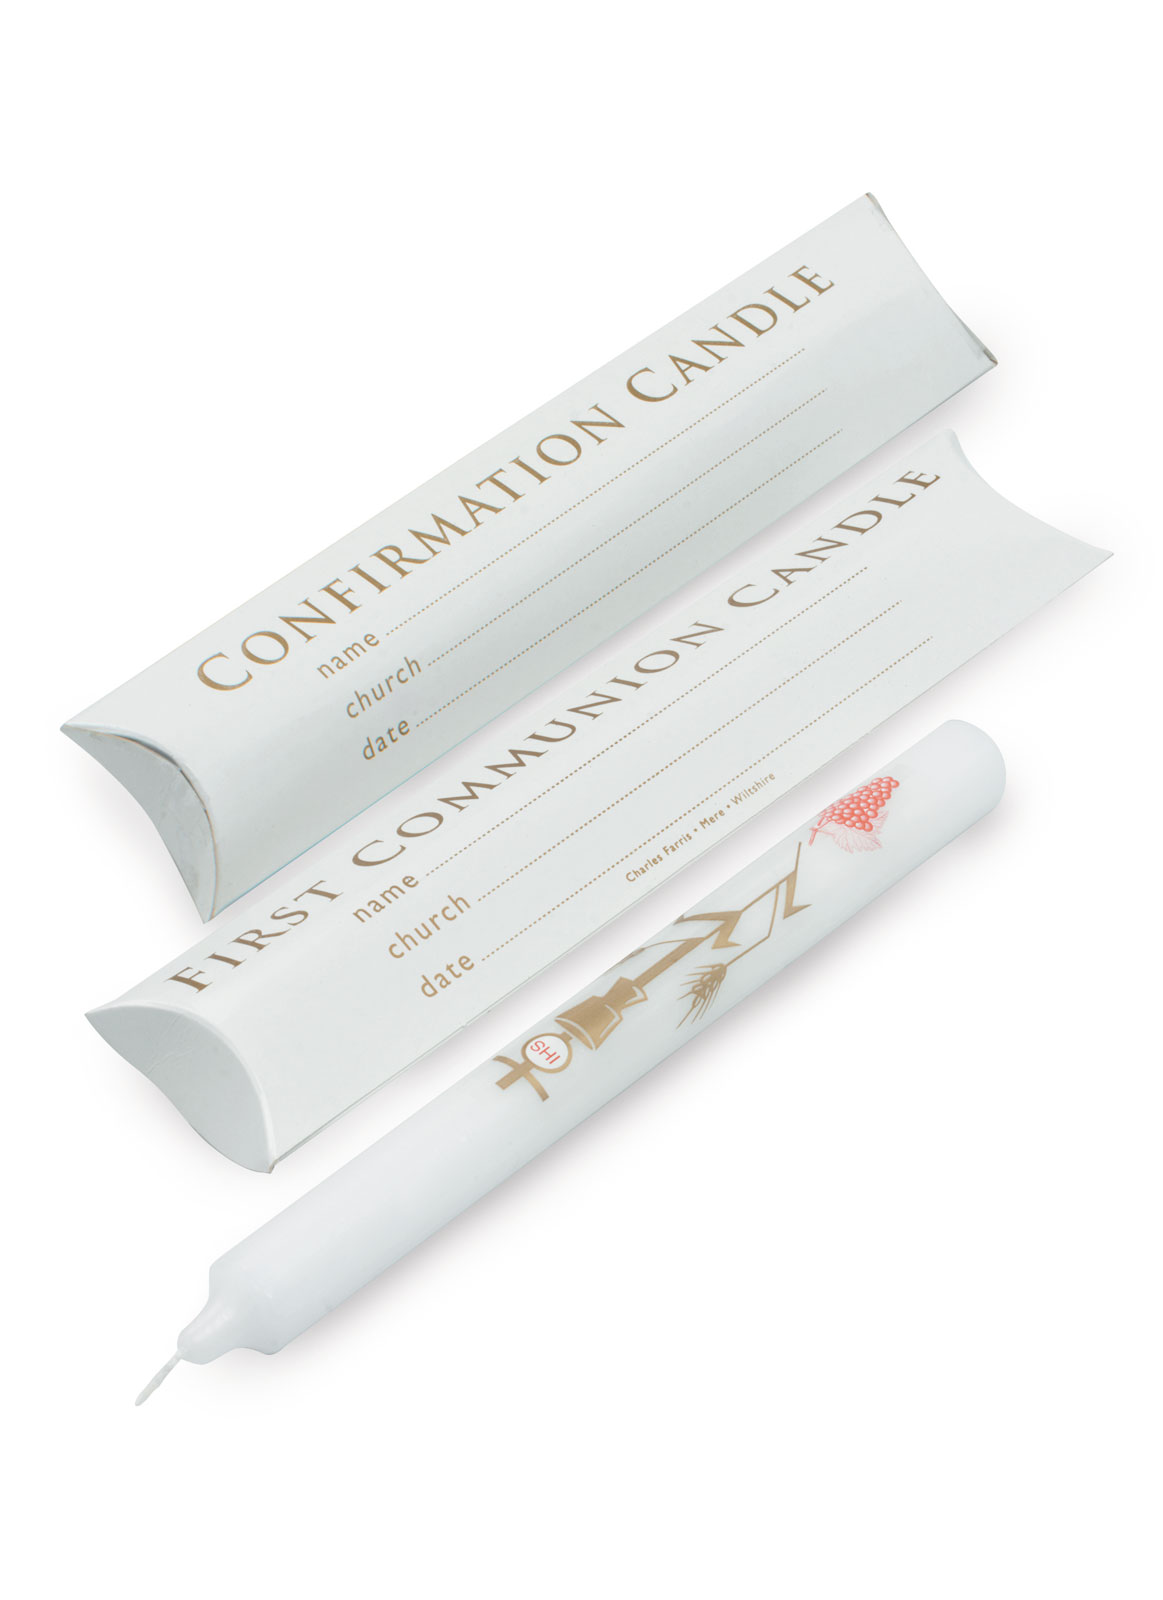 FIRST COMMUNION/CONFIRMATION CANDLE